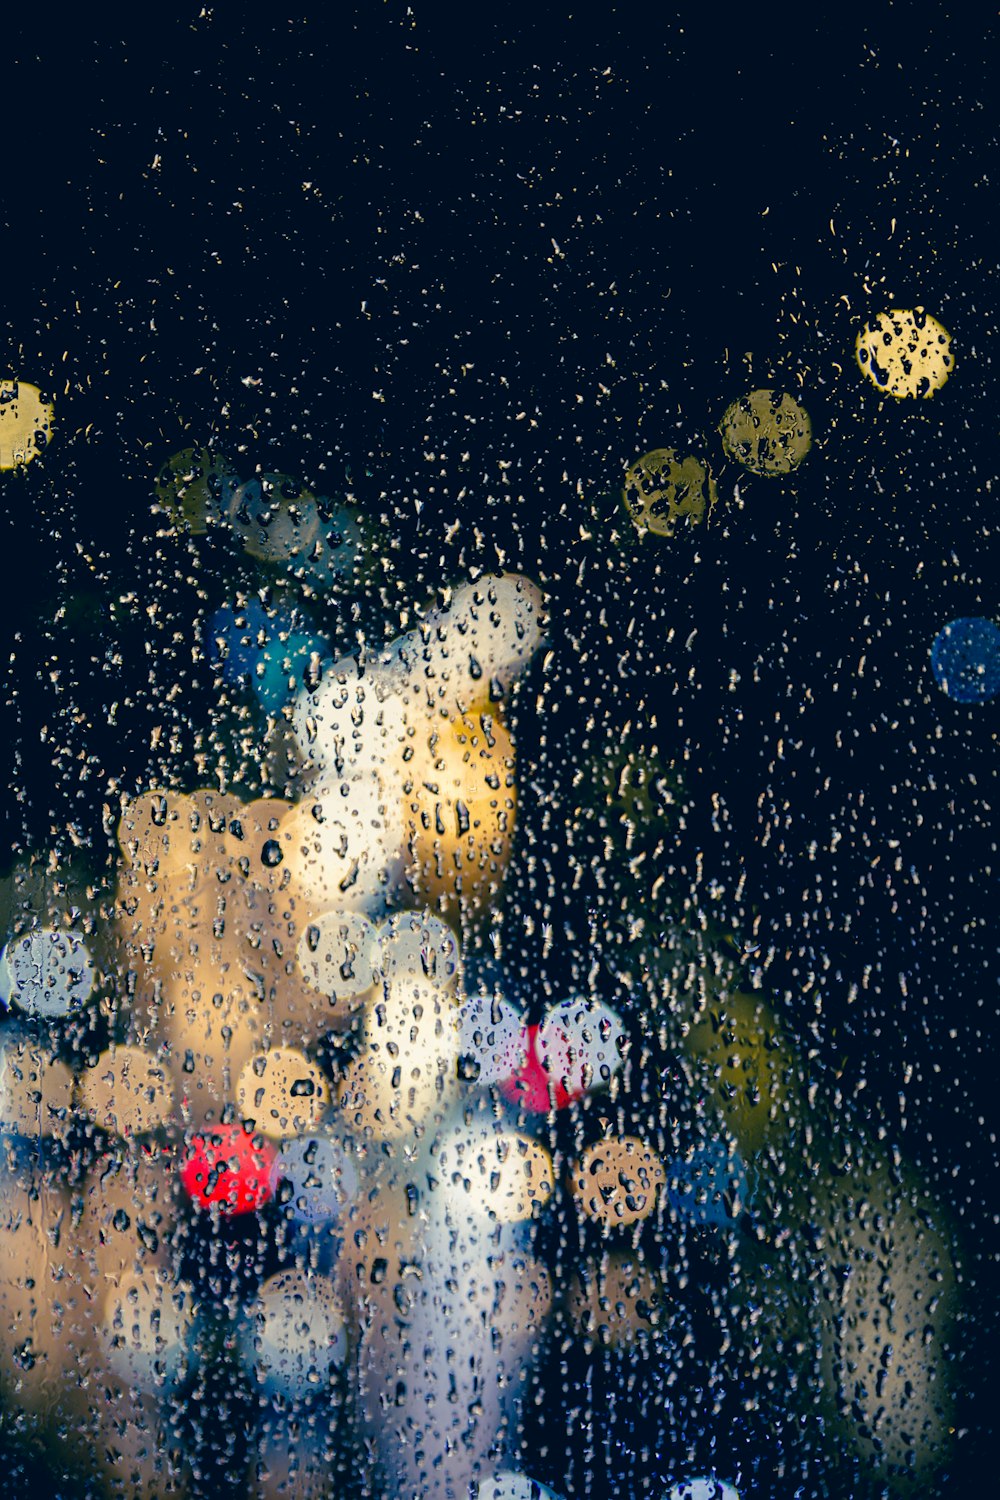 rain drops on a window with a blurry image of a city street